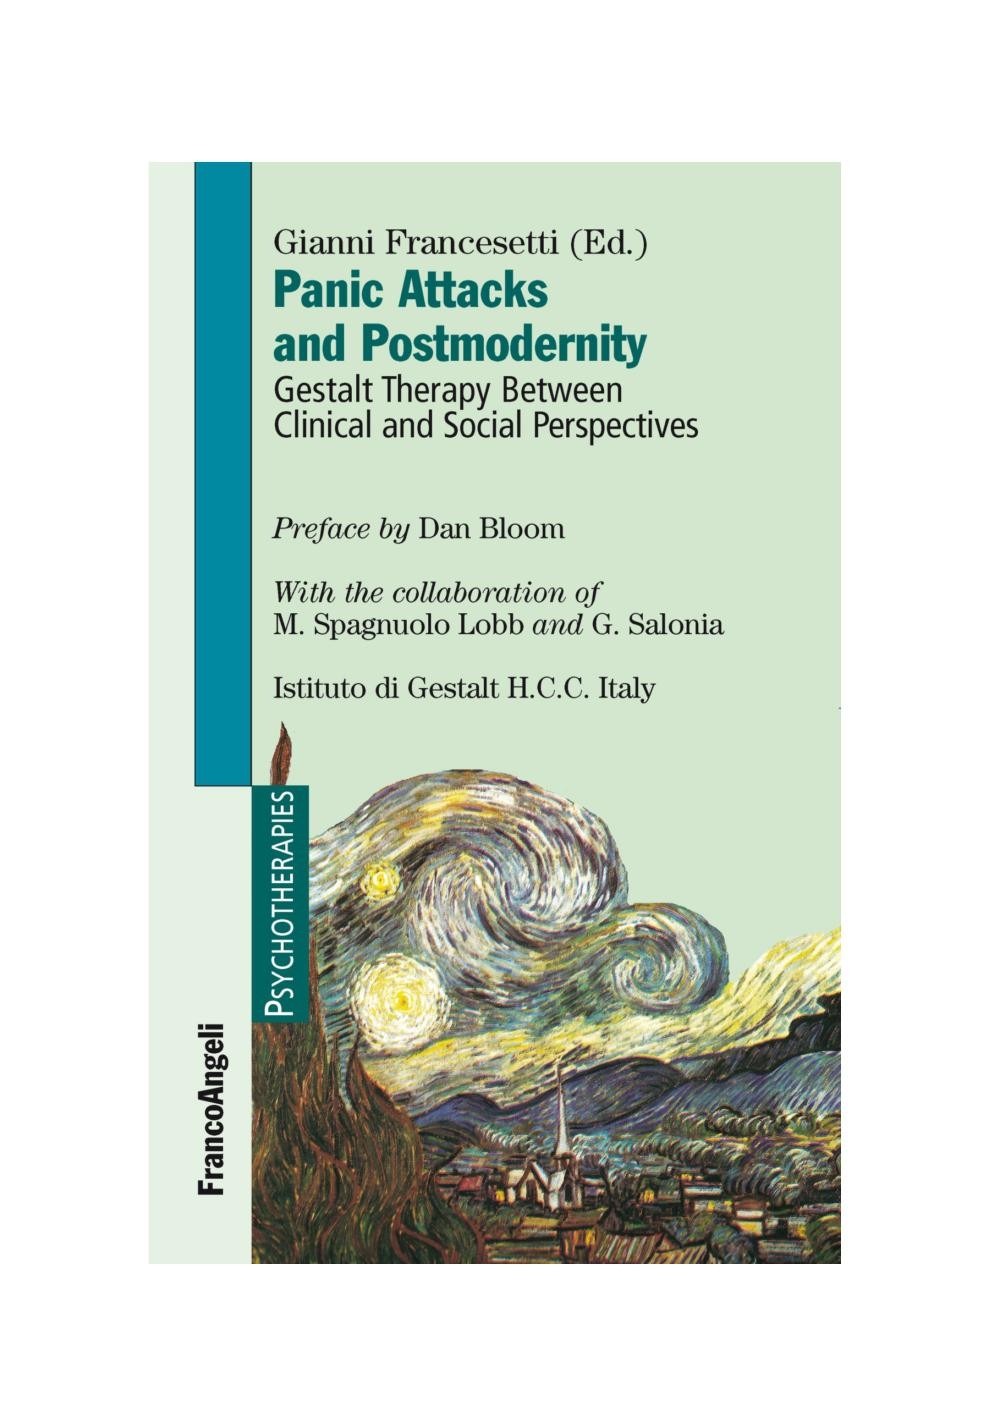 Panic attacks and postmodernity. Gestalt therapy between clinical and social perspectives - Librerie.coop